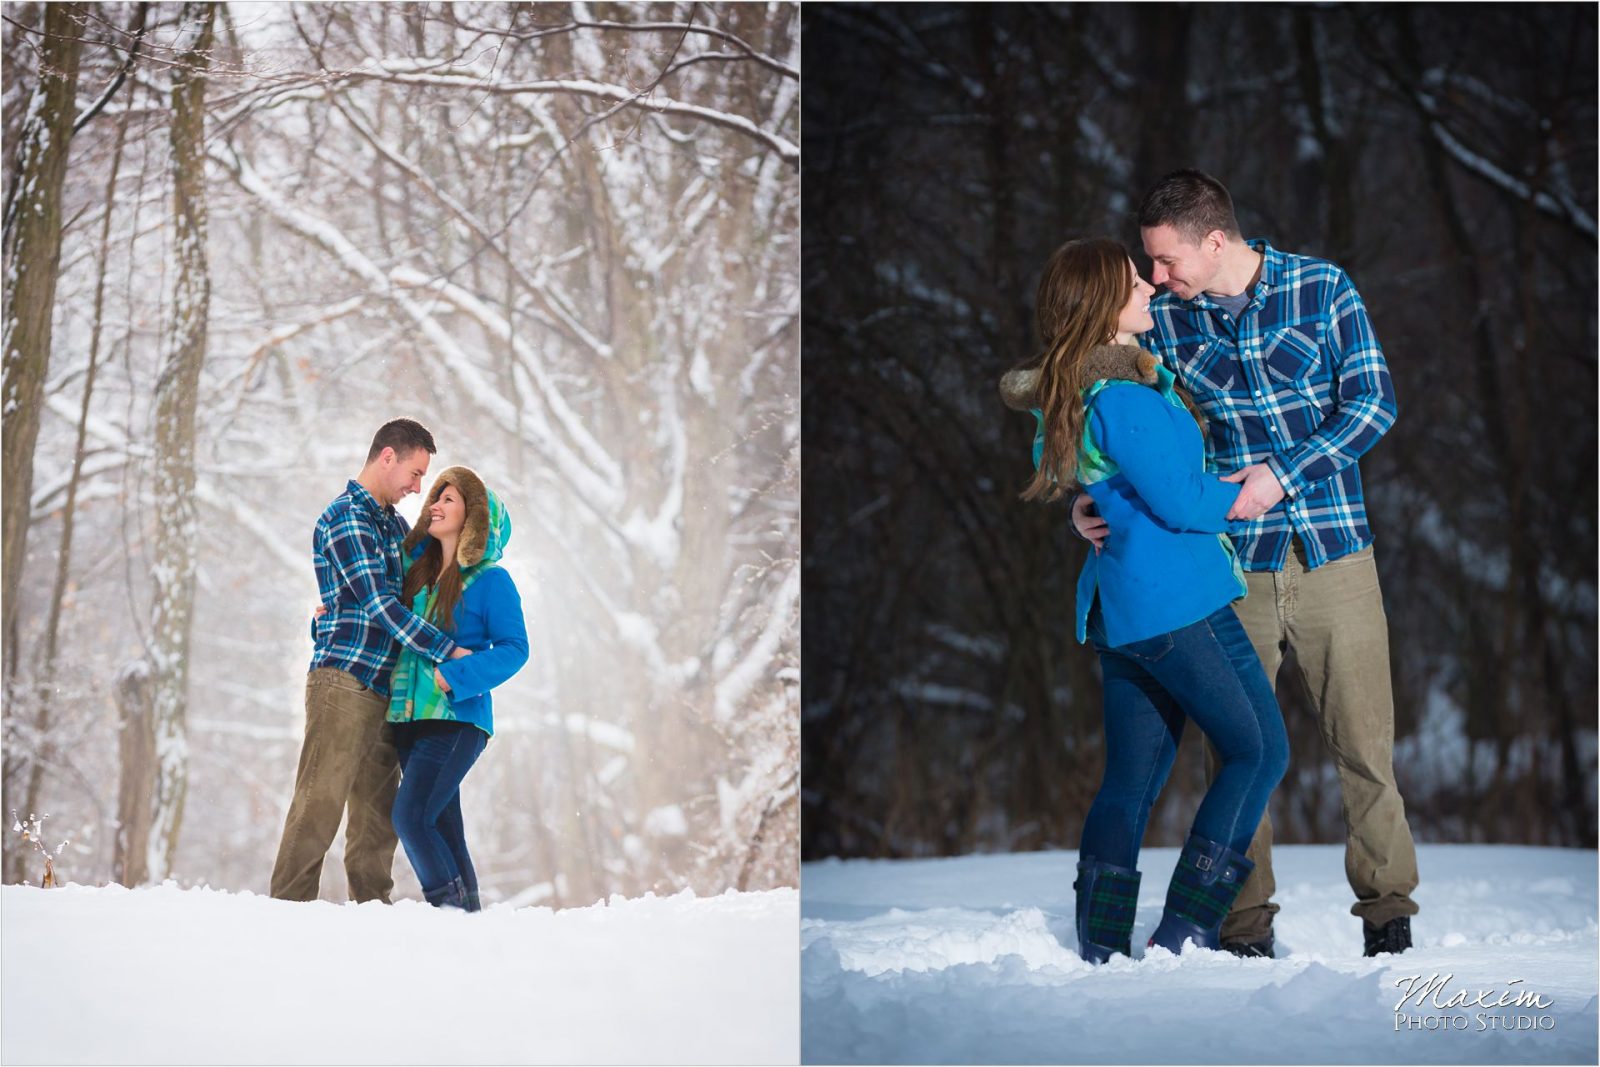 Winton Woods snow trees backlight engagement